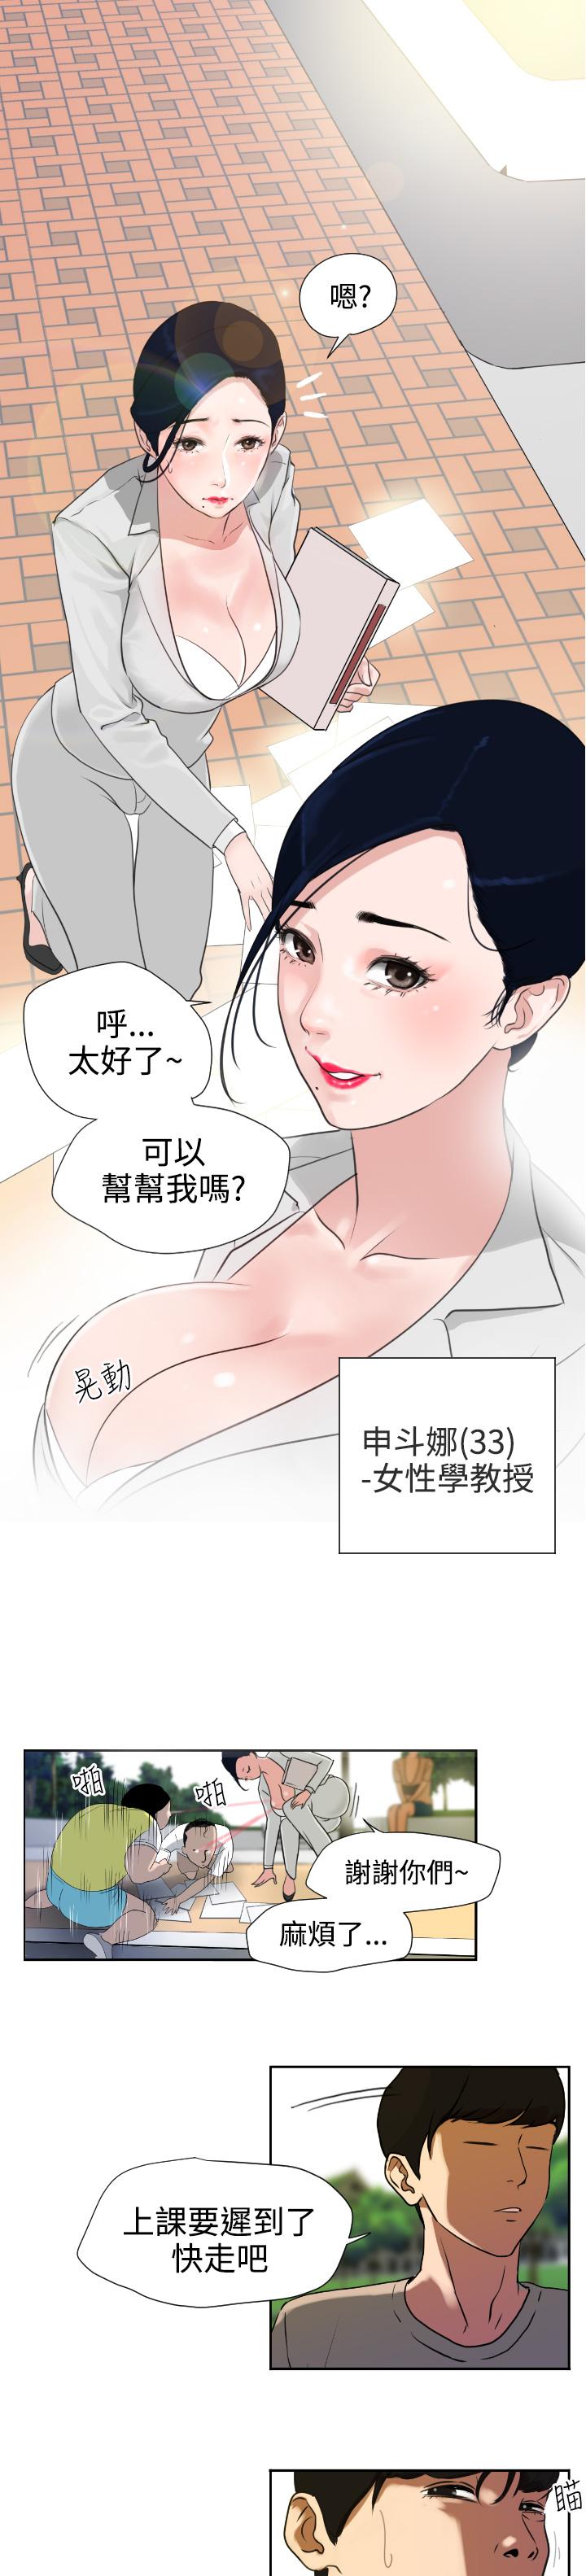 Desire King (慾求王) Ch.1-7 (chinese) 14